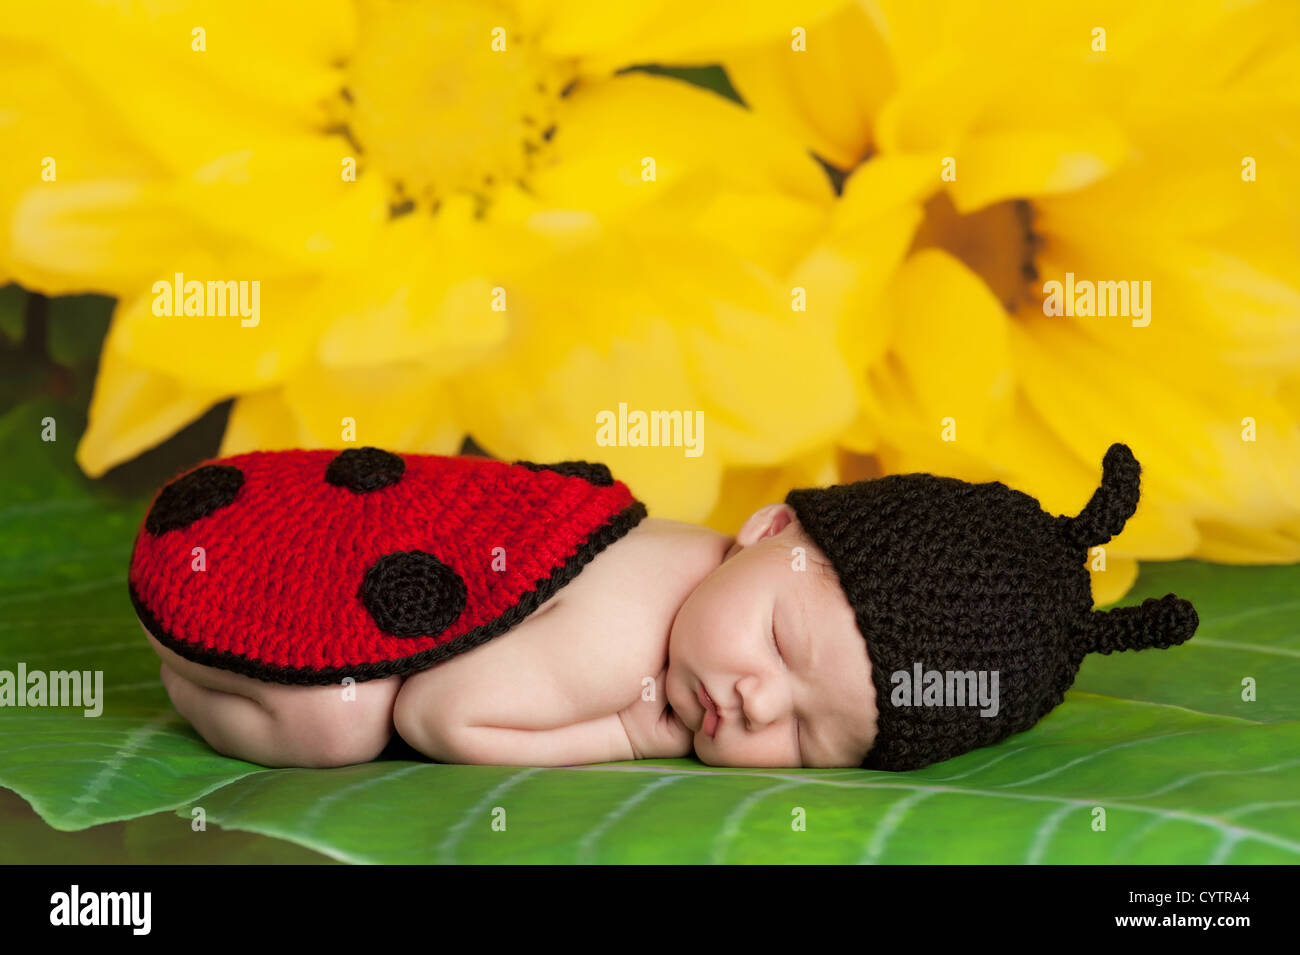 8 day old newborn girl wearing a black and red crocheted ladybug costume sleeping on a yellow flower background. Stock Photo